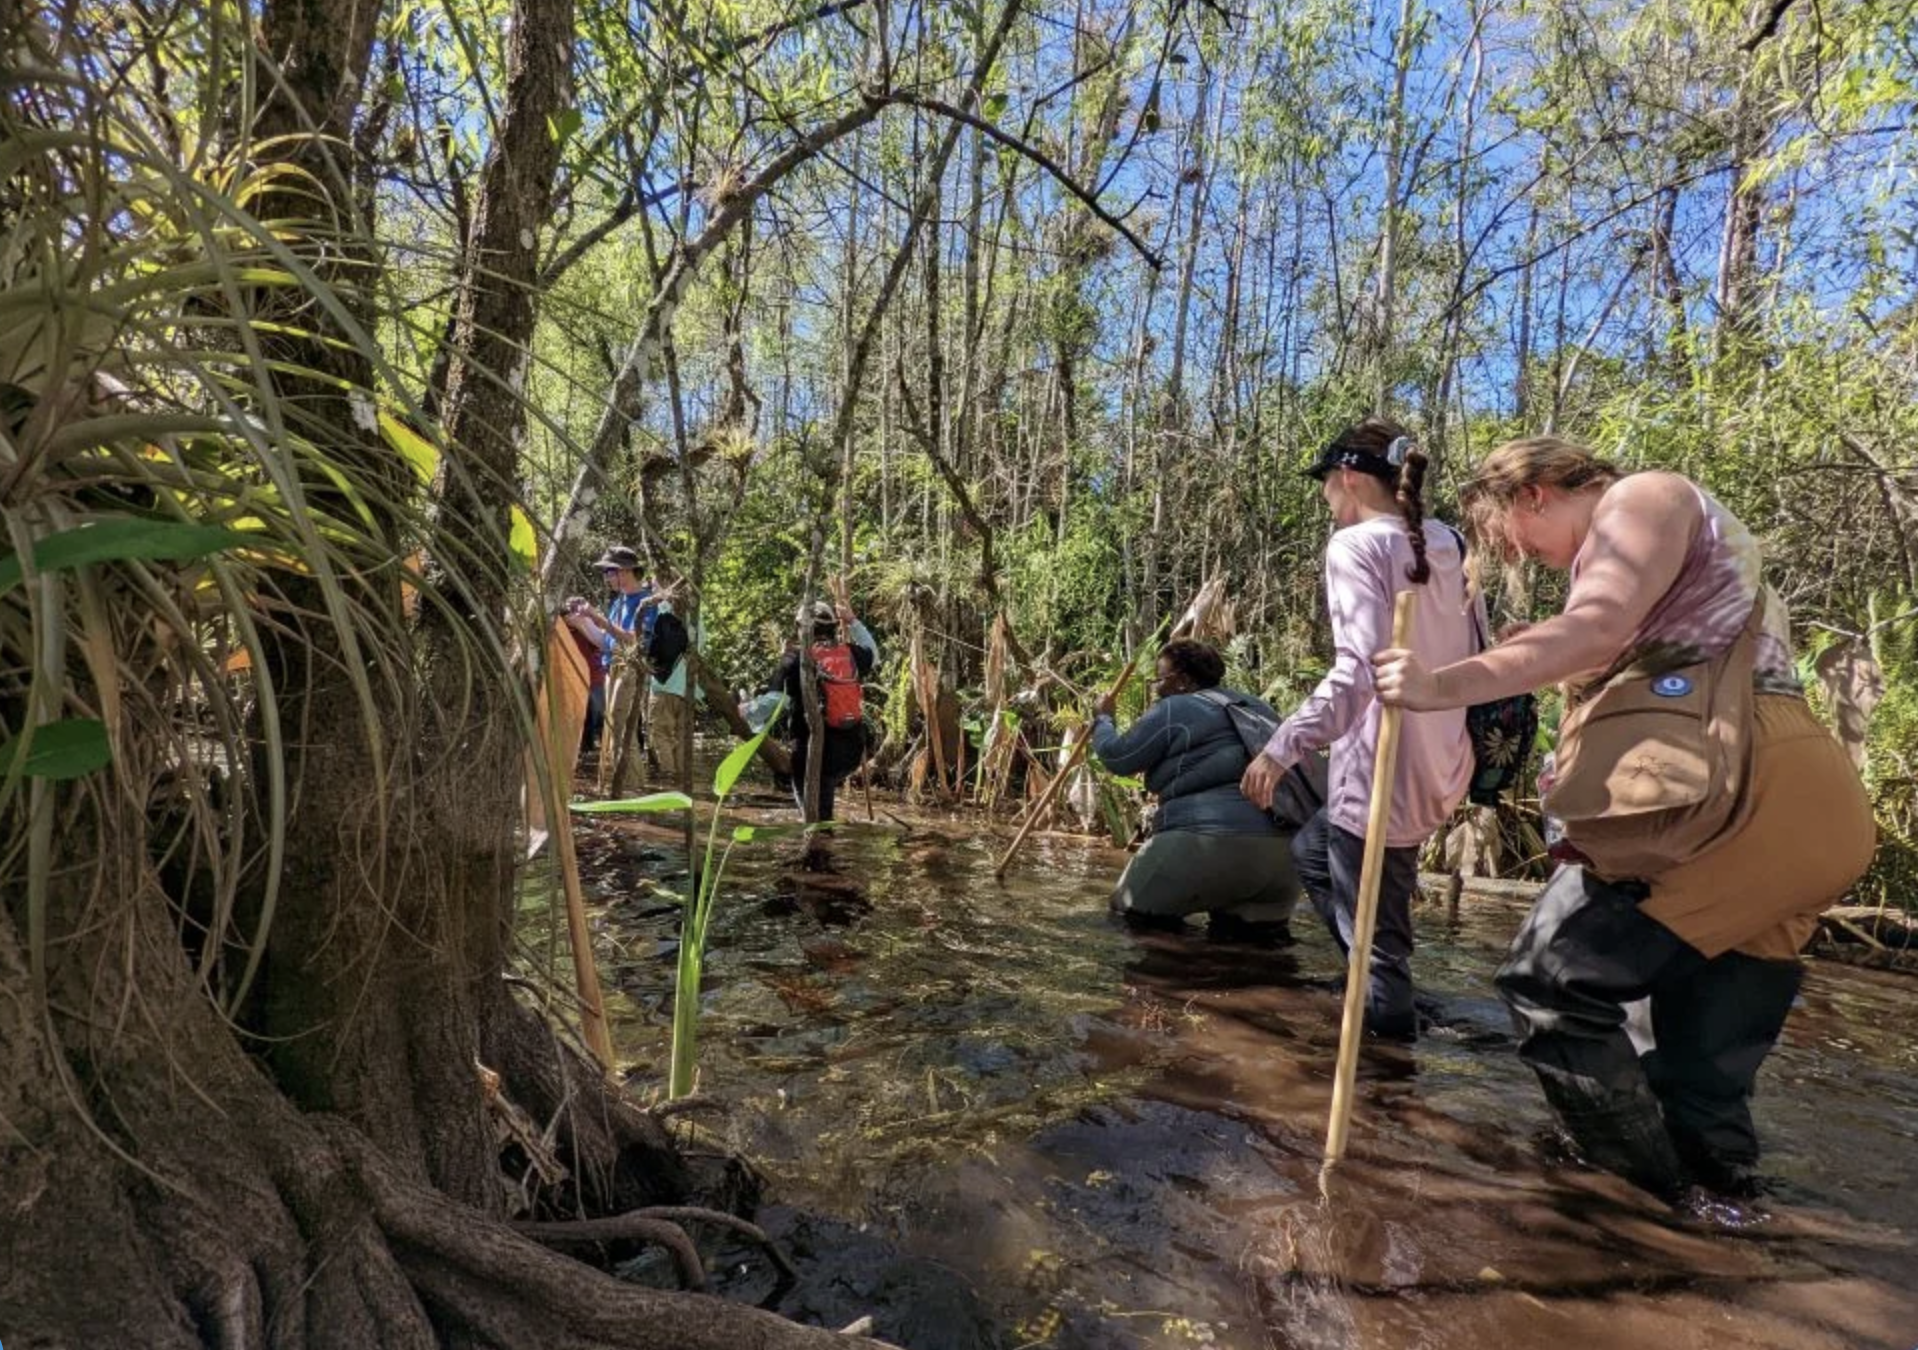 Trip to Everglades Brings Students into World of Wetland Restoration